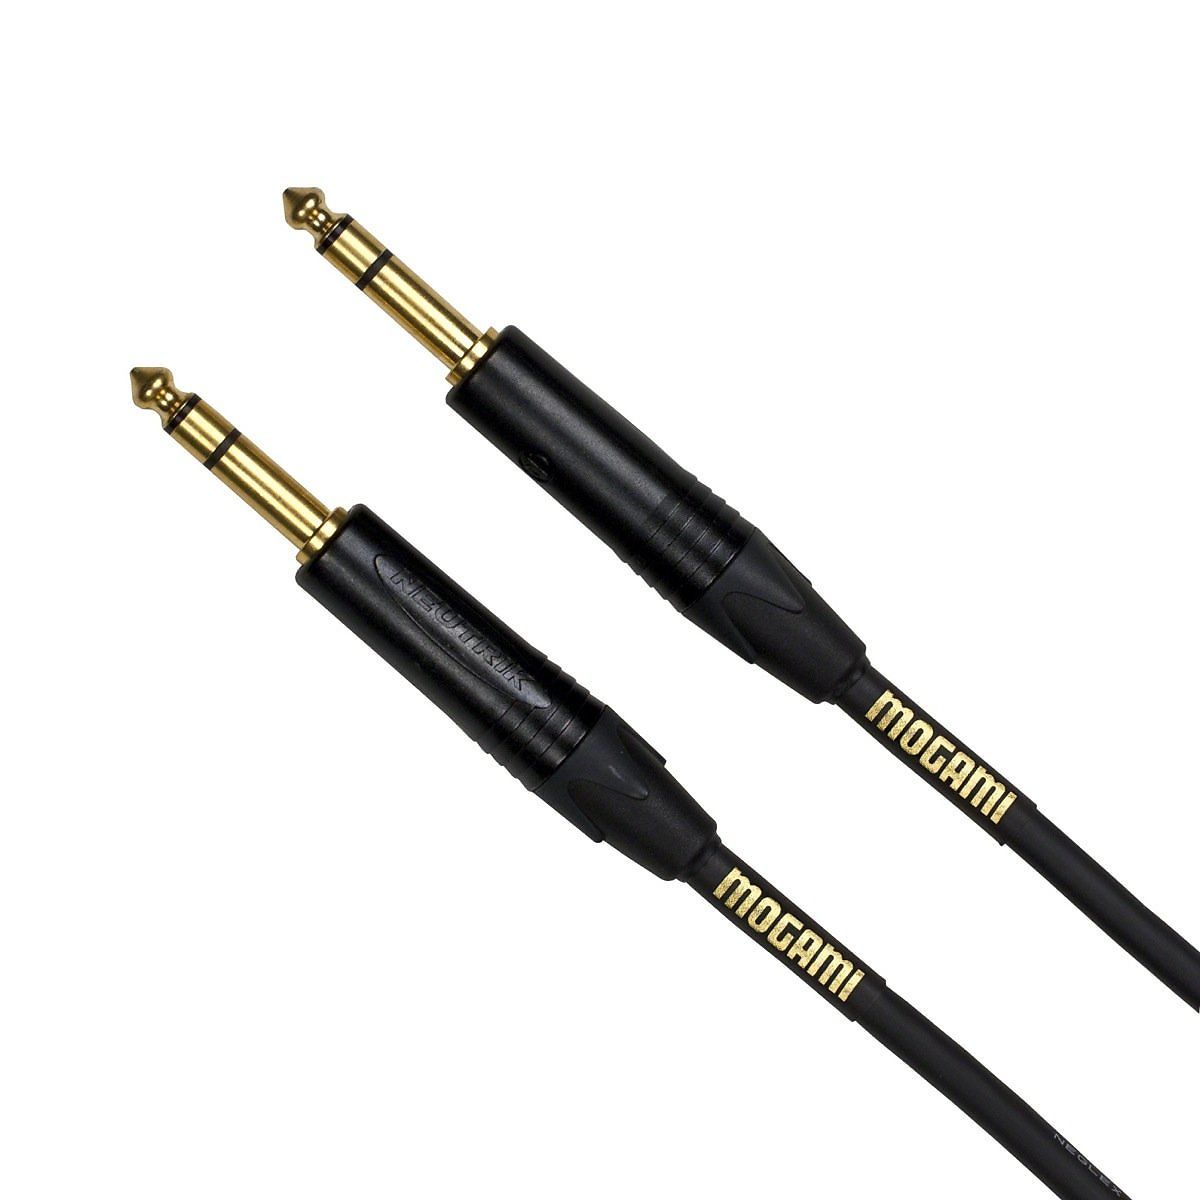 Mogami Gold 1/4 Inch TRS to 1/4 Inch TRS Patch Cable, 6 Foot